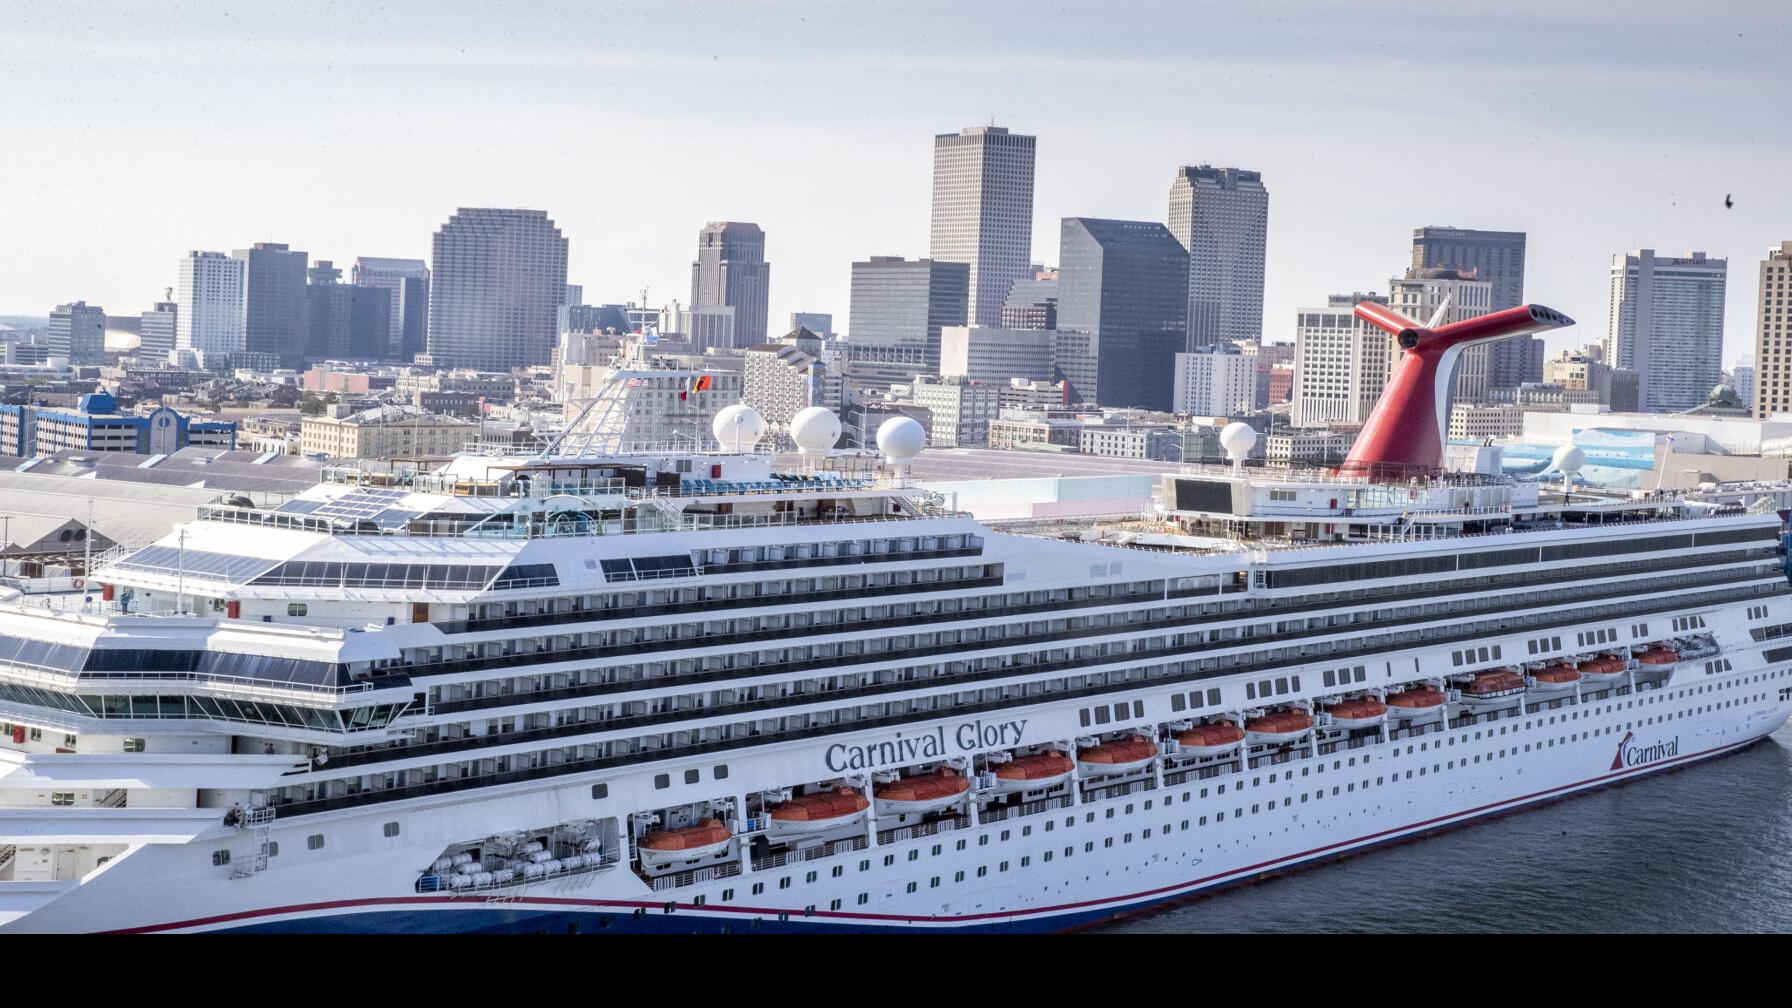 Carnival Glory leaves New Orleans, will be based in Florida | Business News  